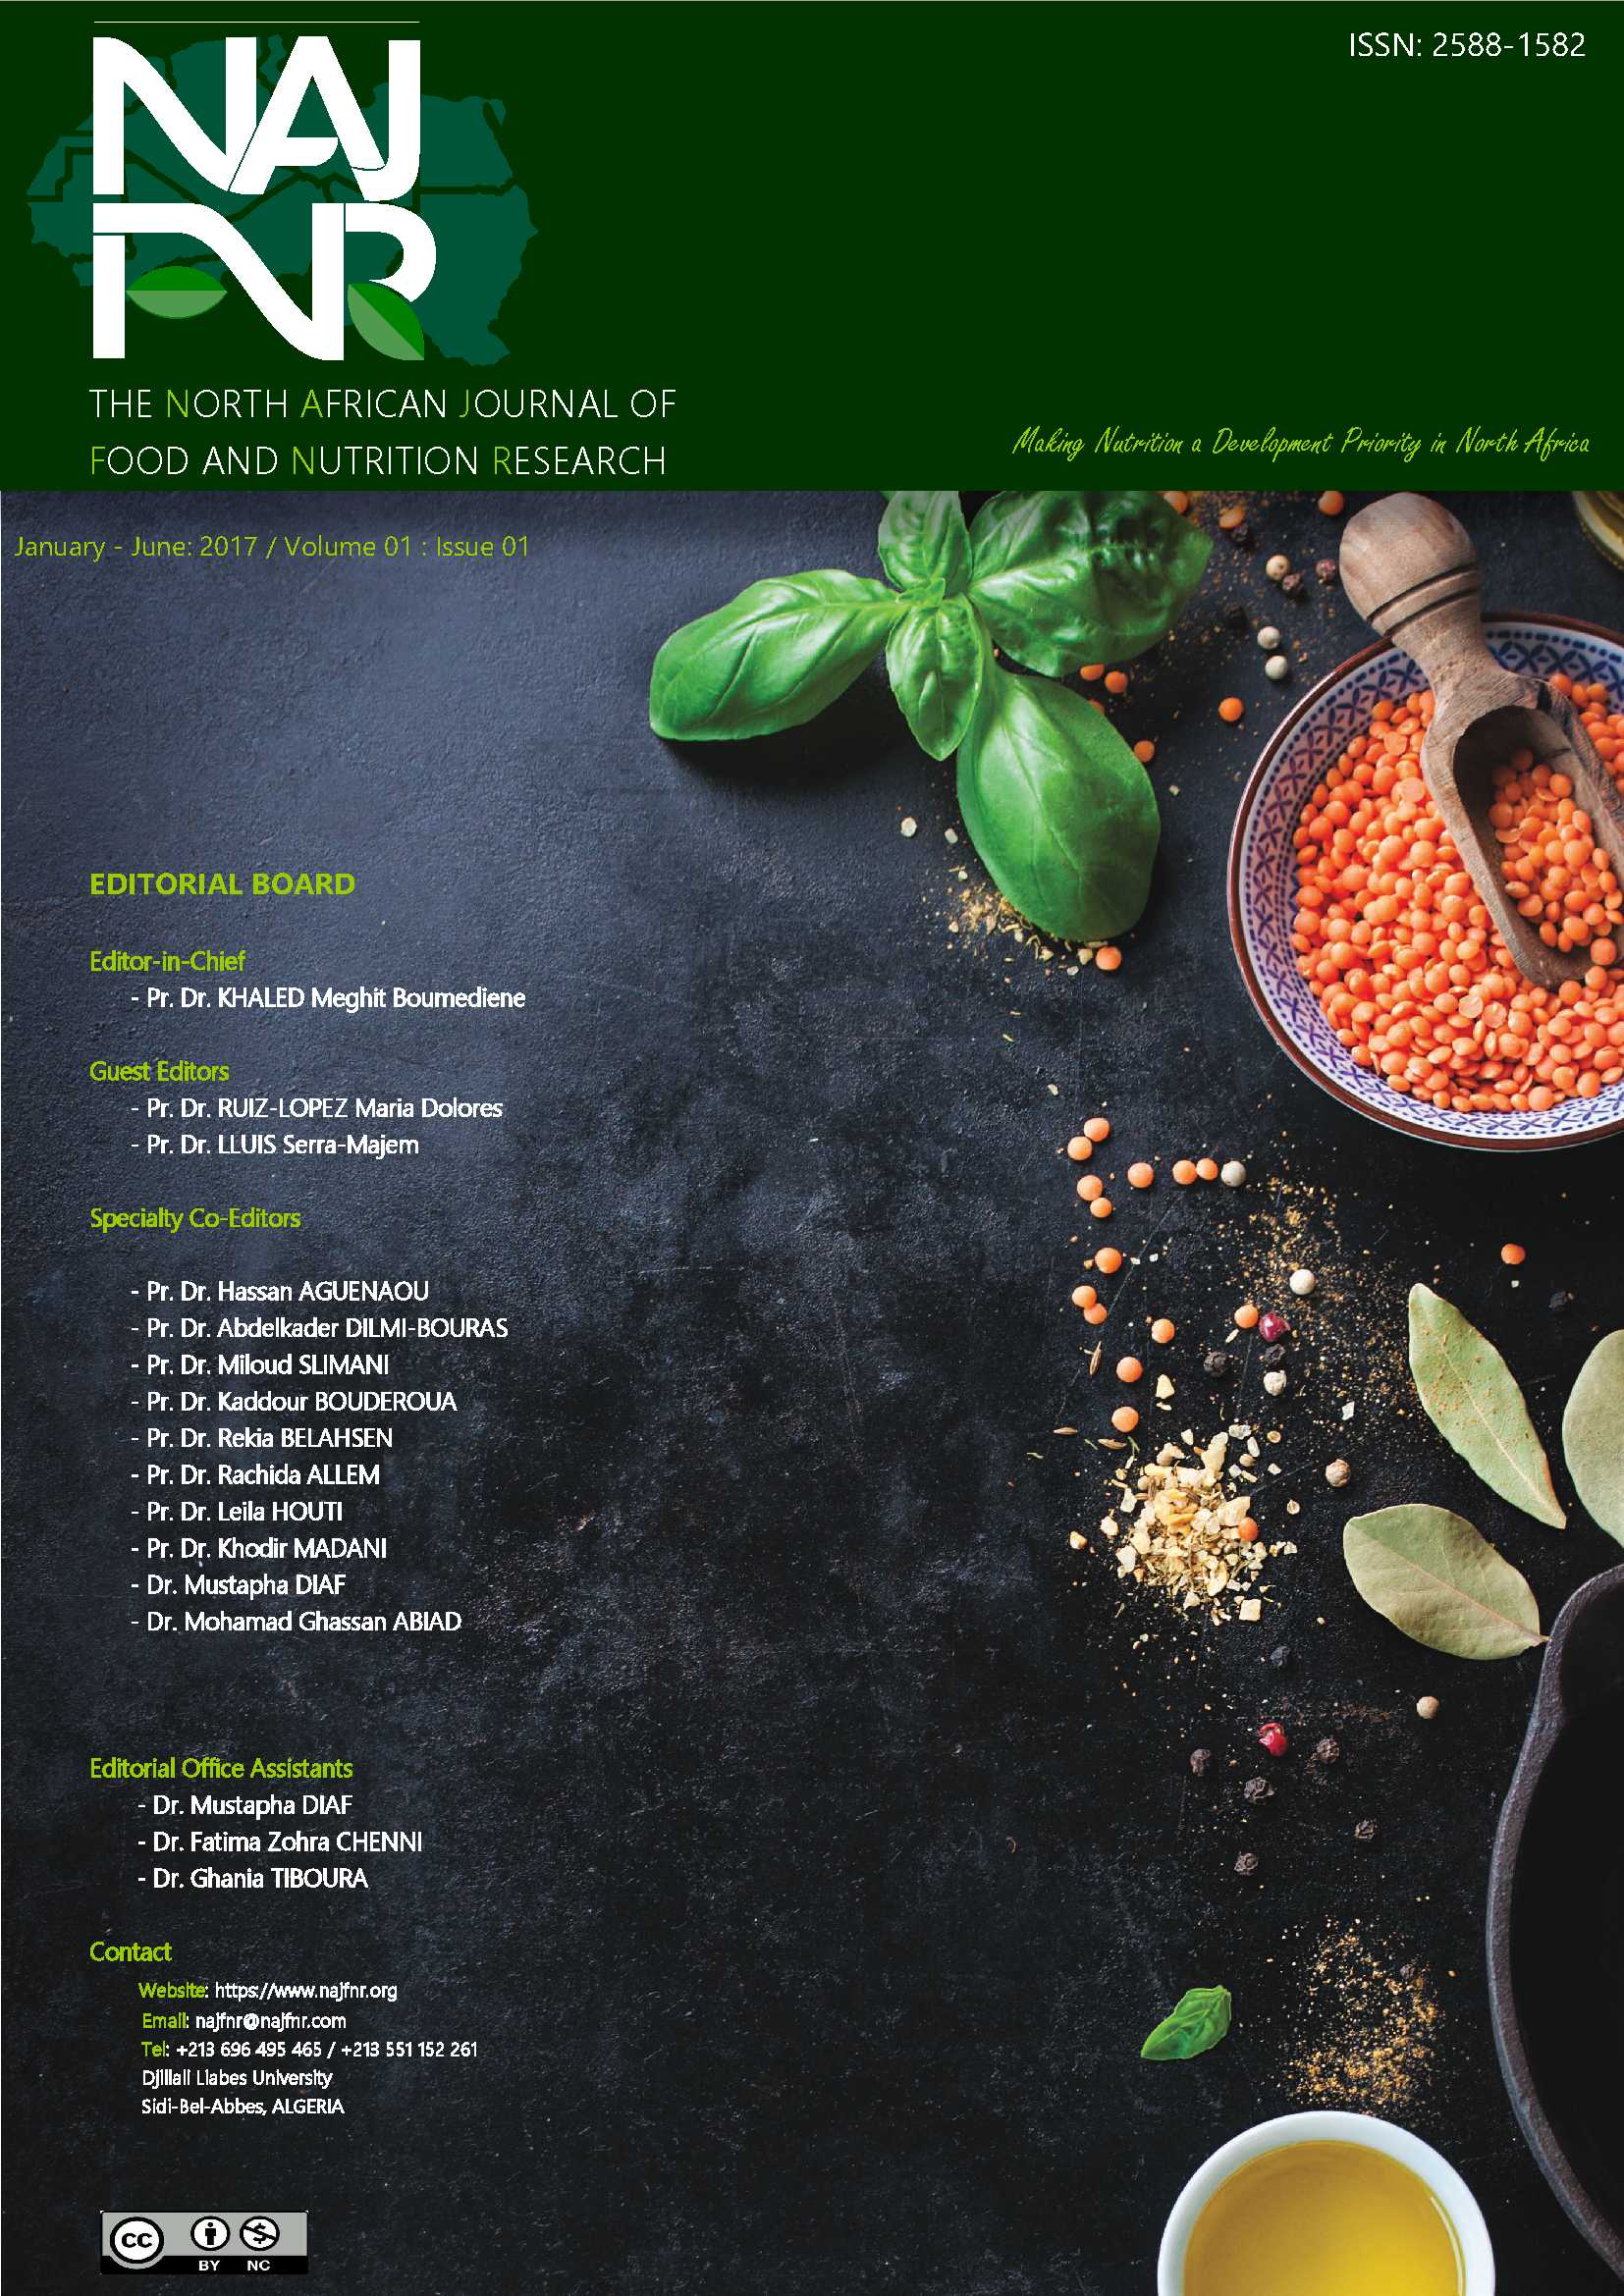 The North African Journal of Food and Nutrition research